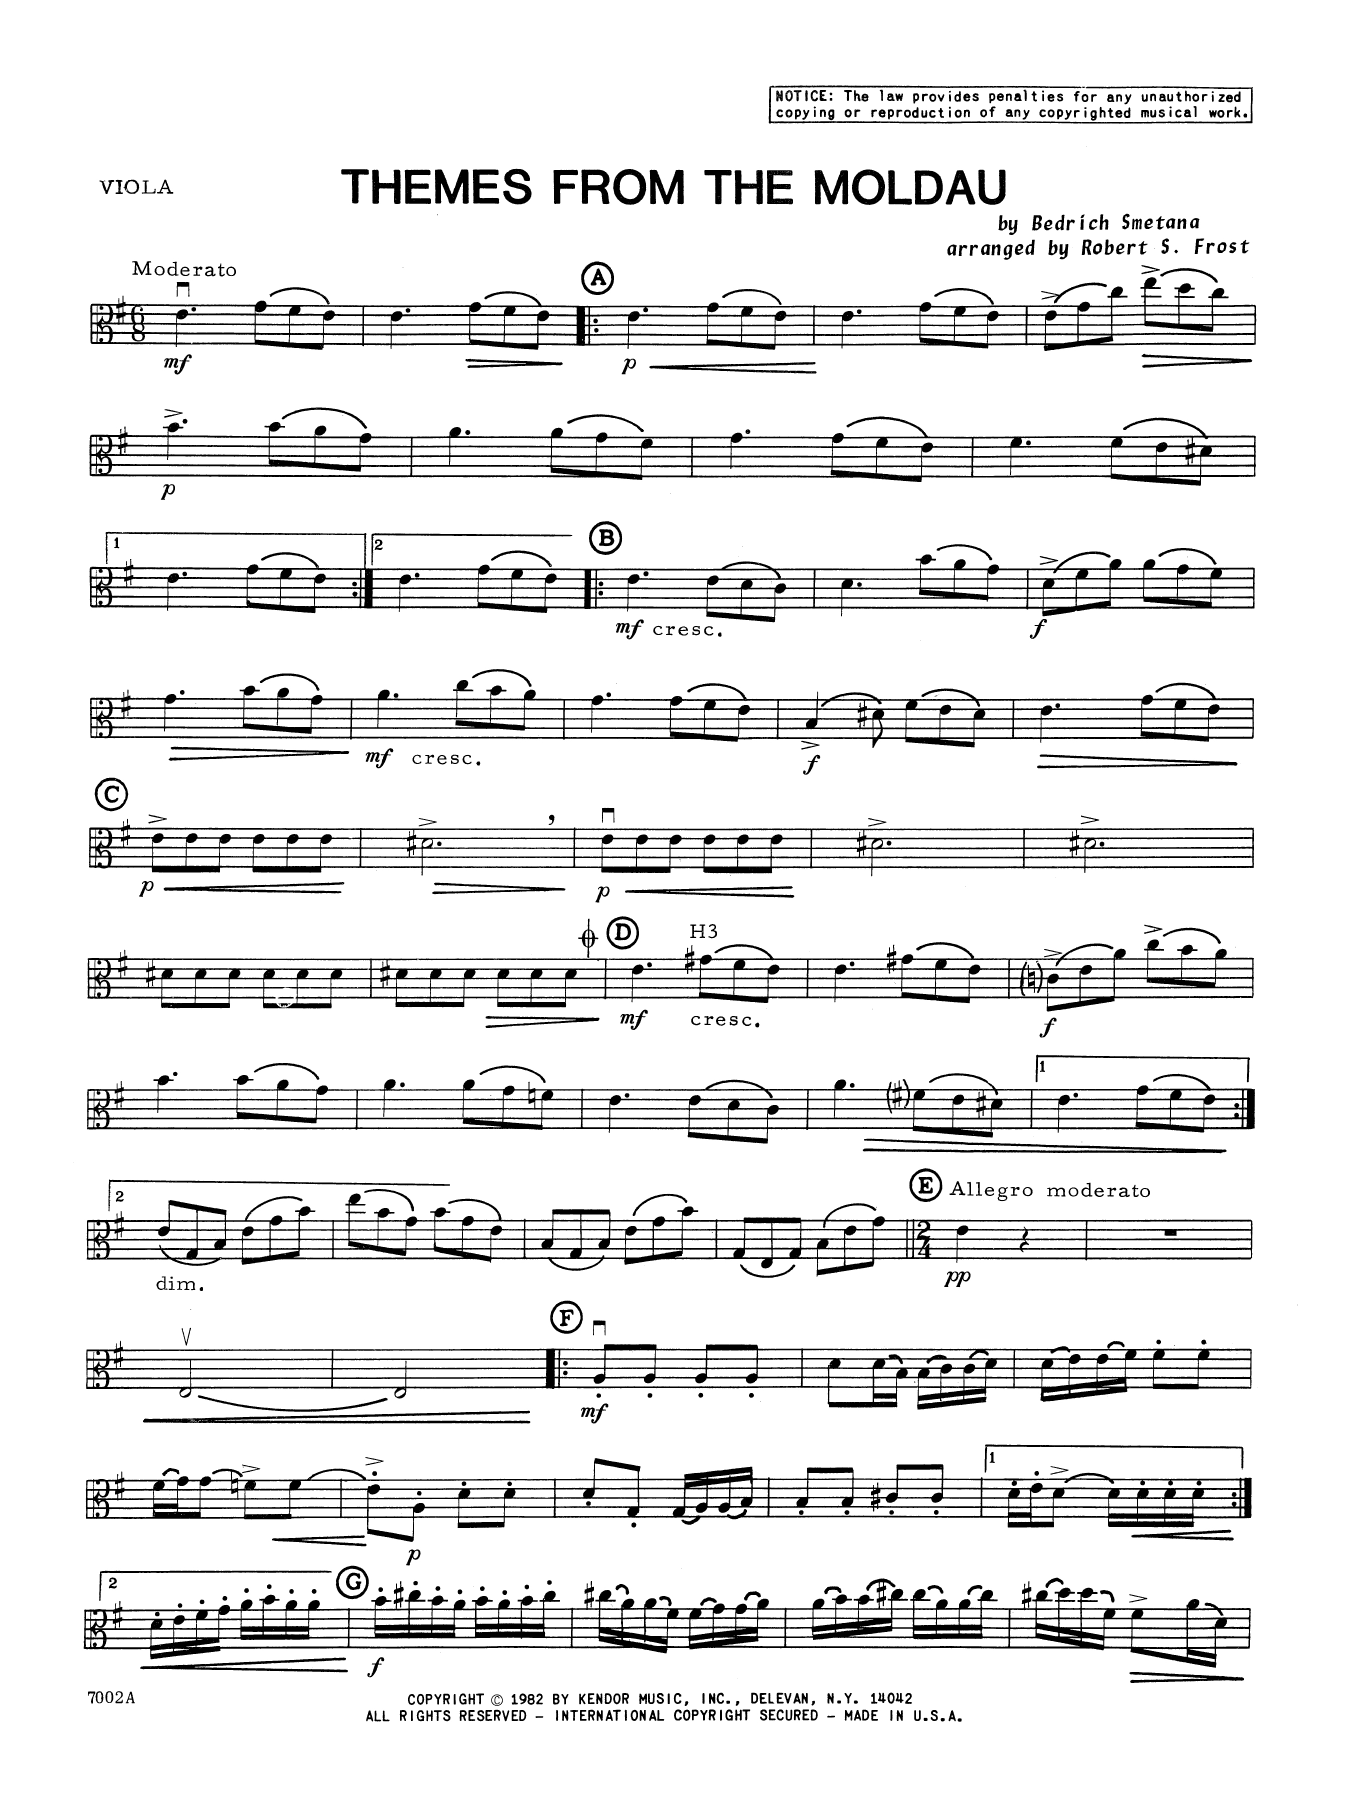 Download Robert S. Frost Themes From The Moldau - Viola Sheet Music